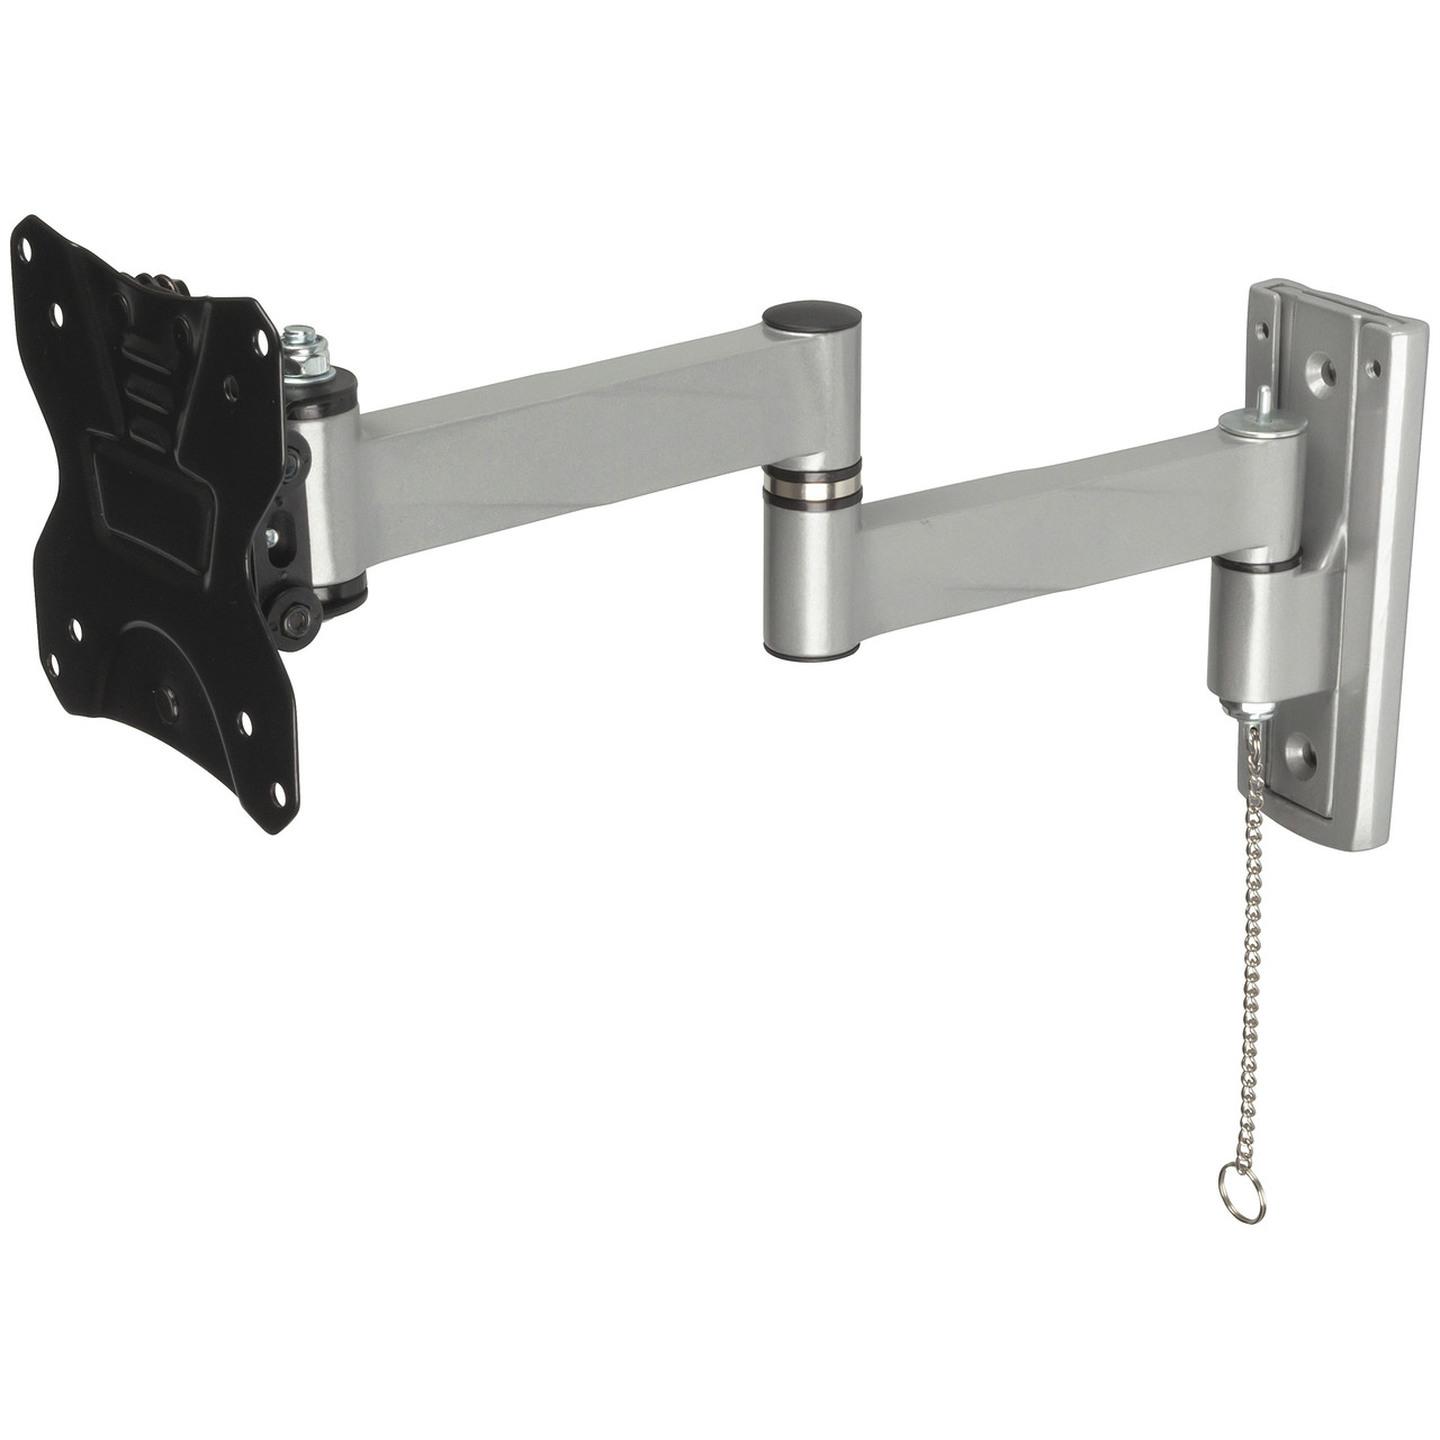 13-42 Inch LCD Monitor Swing Arm Wall Bracket with 2 Slide In Locking Plates